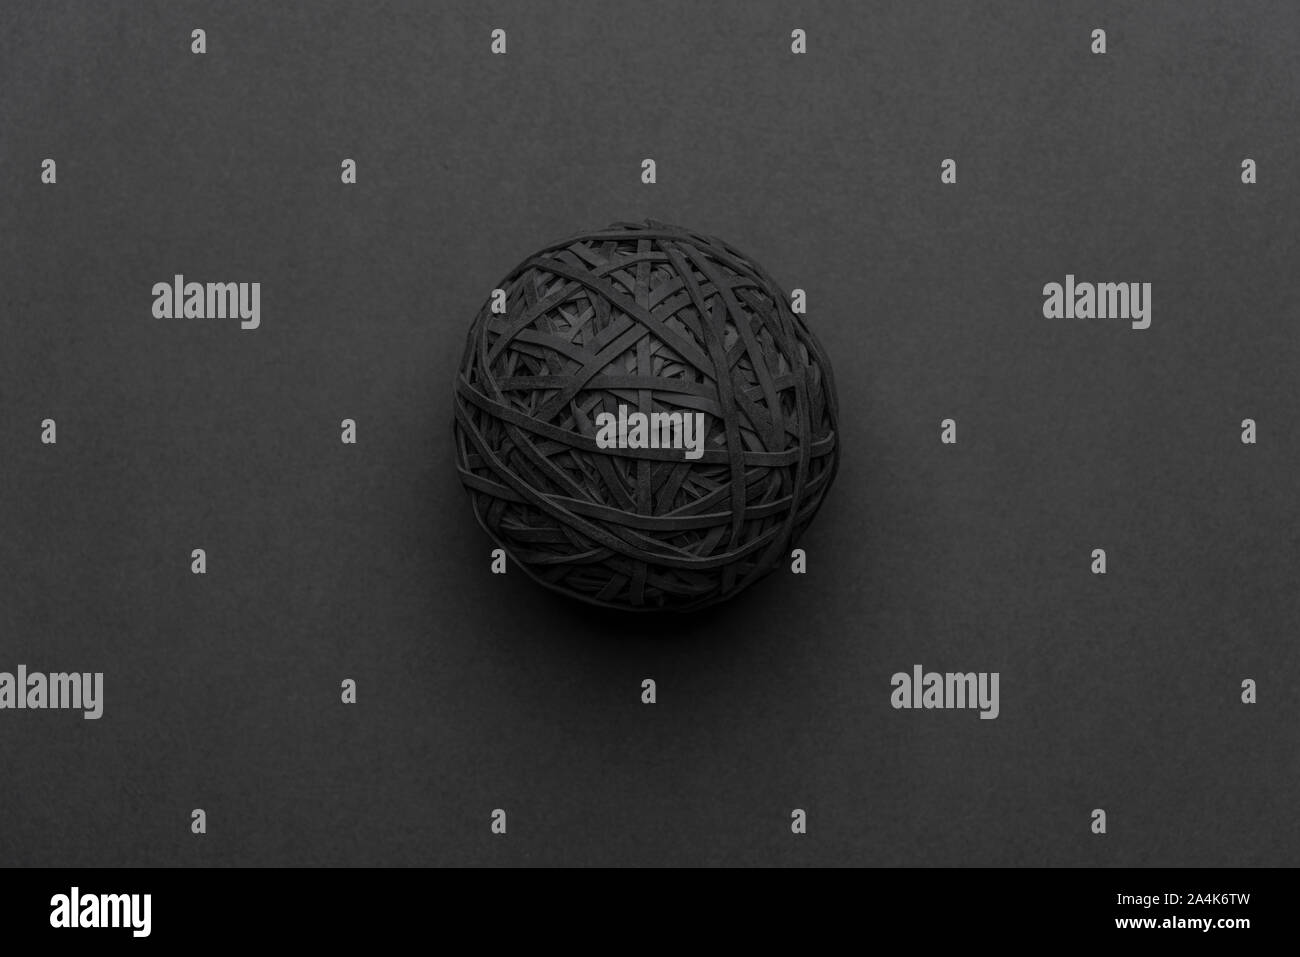 Black rubber band ball isolated on a grey background. 14.10.2019 Please credit: Phillip Roberts Stock Photo